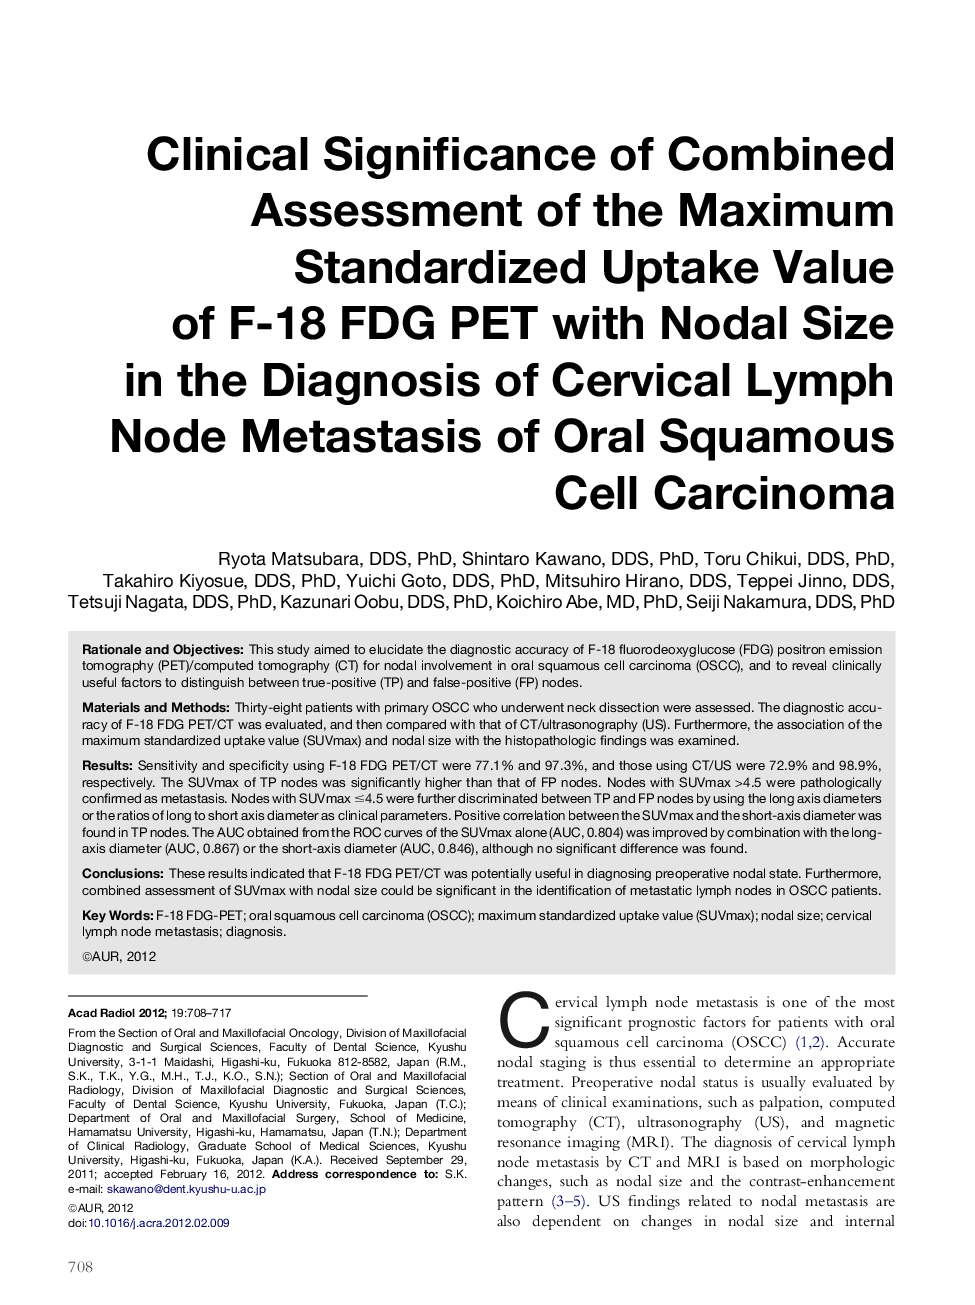 Clinical Significance of Combined Assessment of the Maximum Standardized Uptake Value of F-18 FDG PET with Nodal Size in the Diagnosis of Cervical Lymph Node Metastasis of Oral Squamous Cell Carcinoma